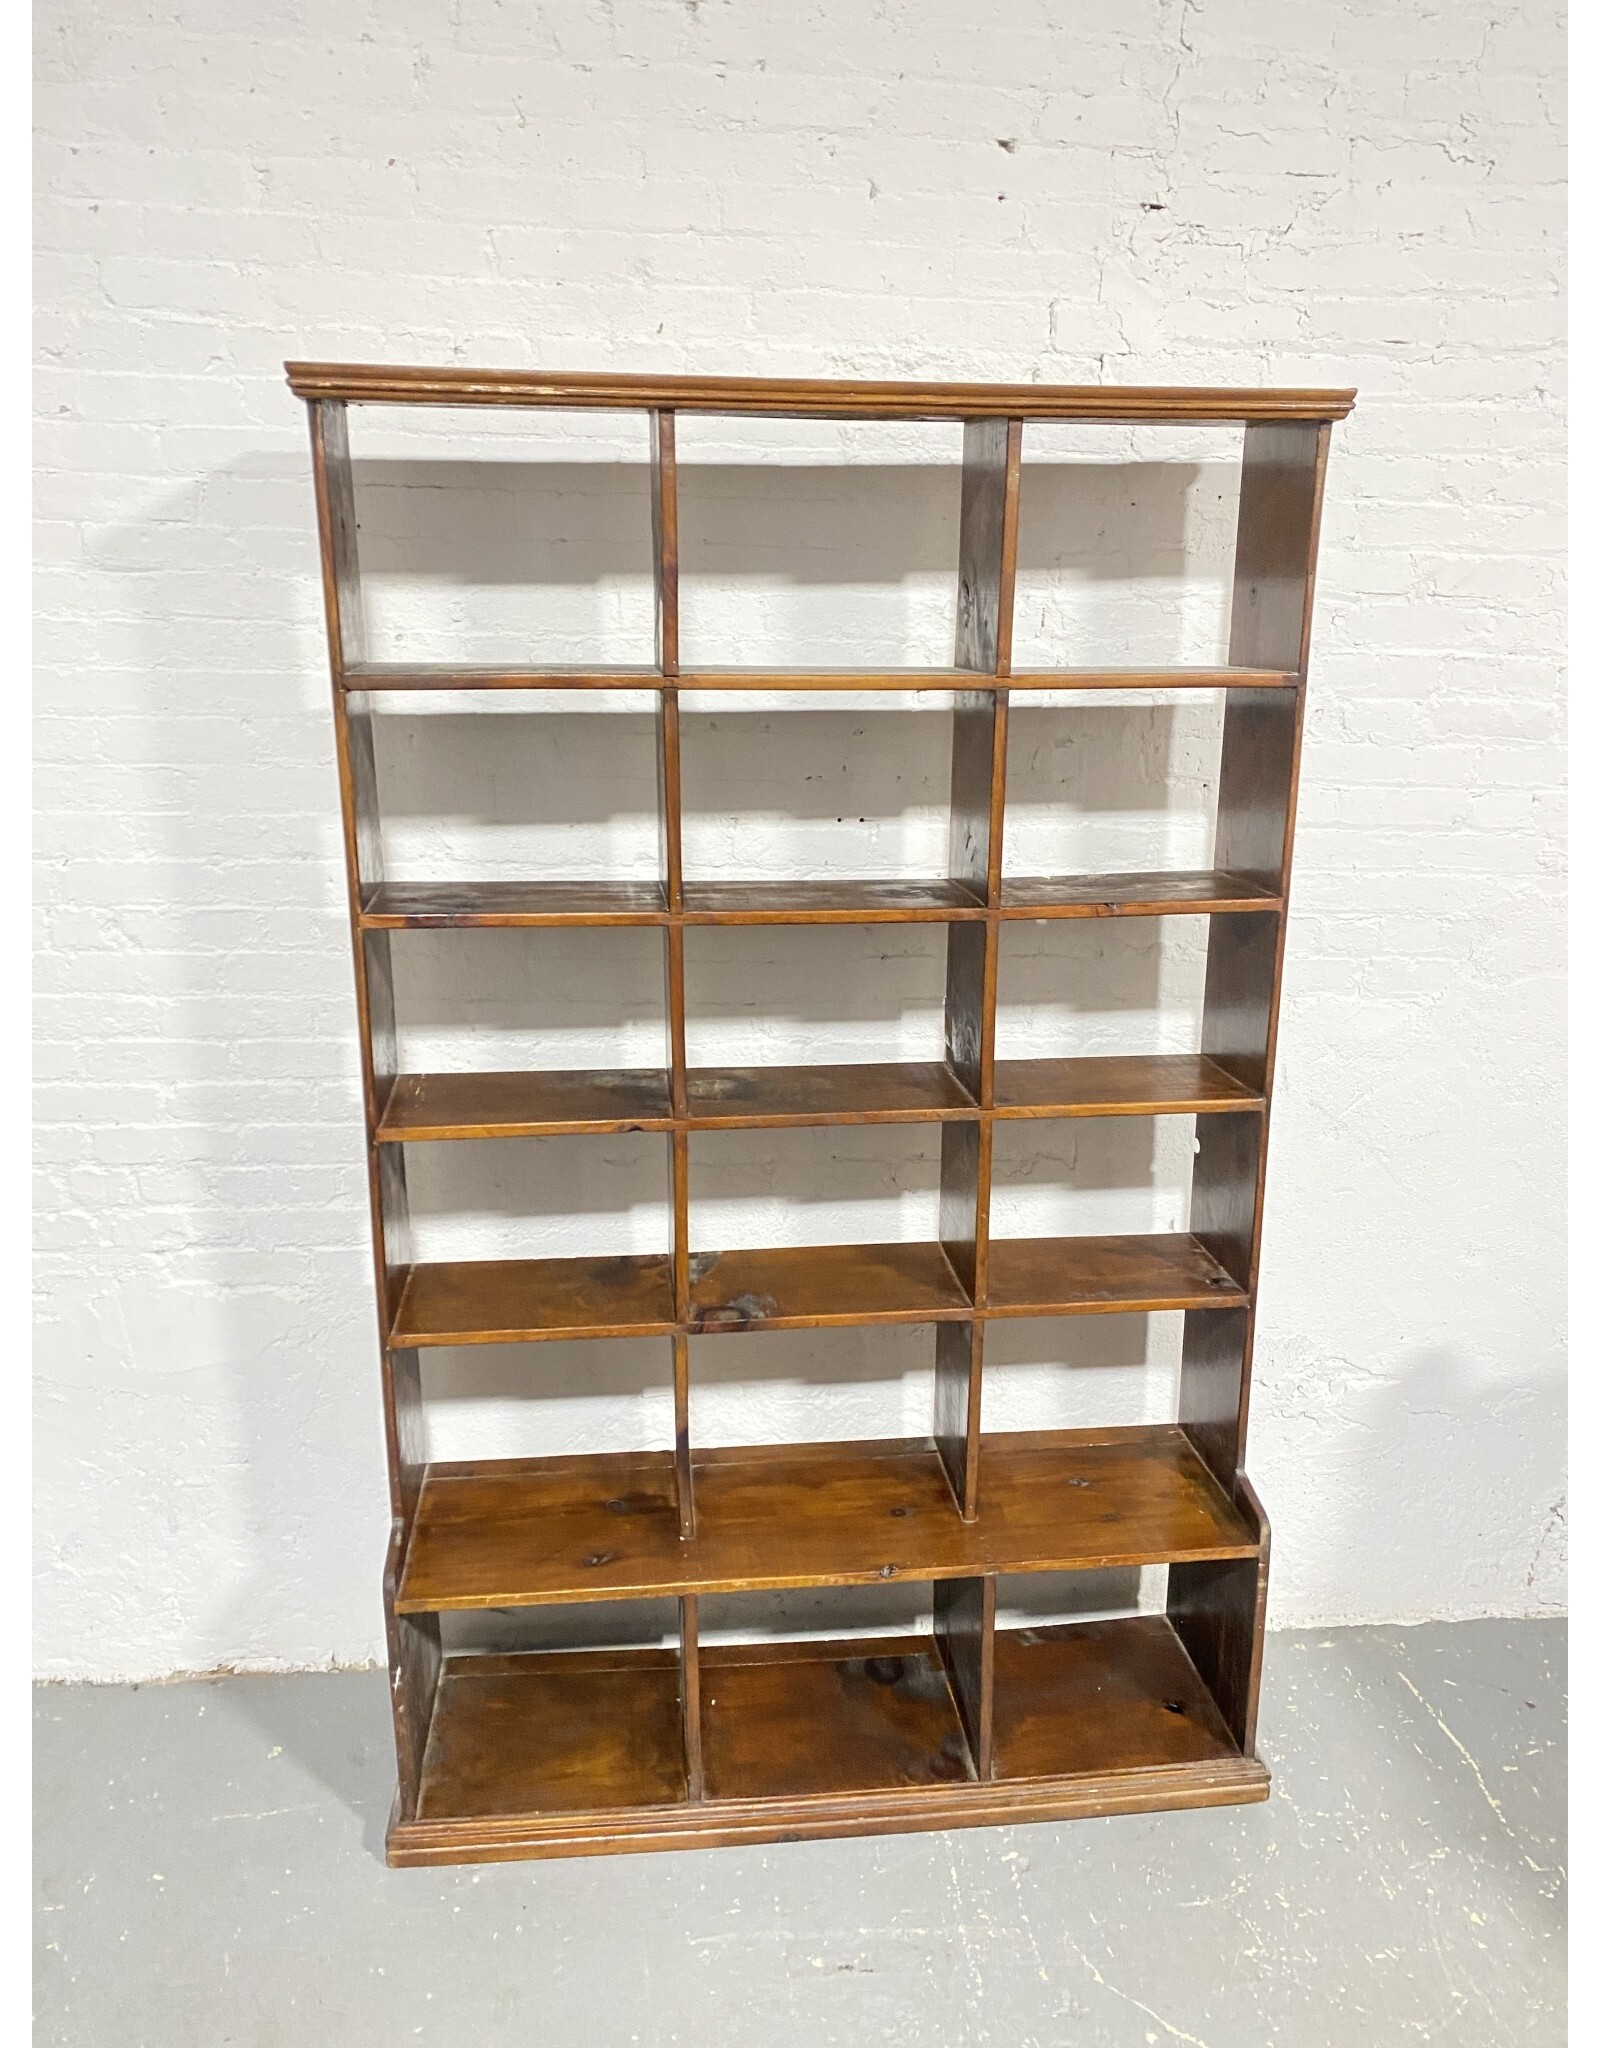 Hand Crafted Wooden Cube Shelving